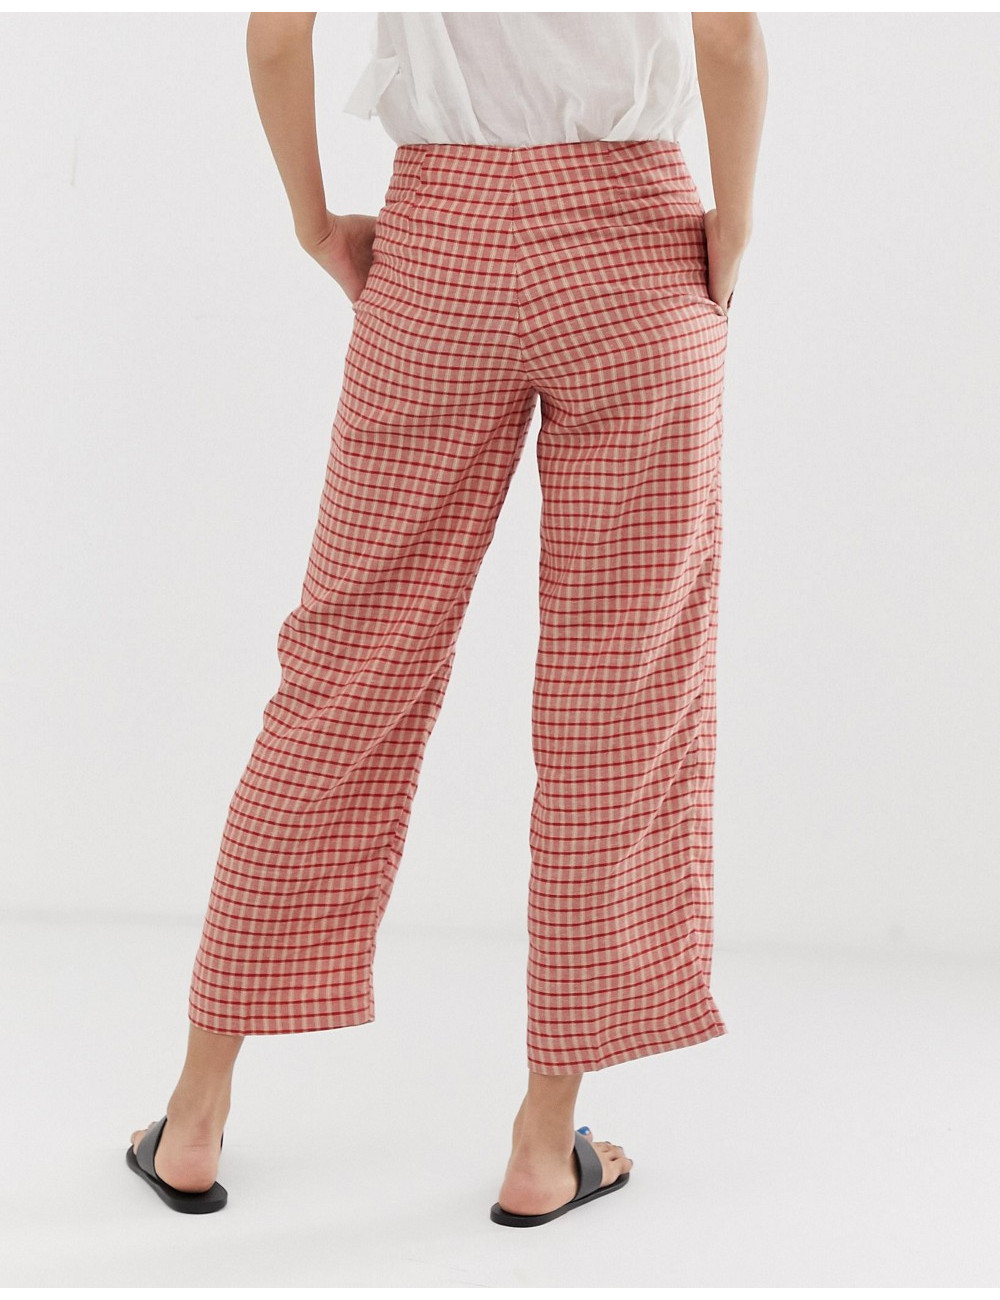 Mango check trouser in red